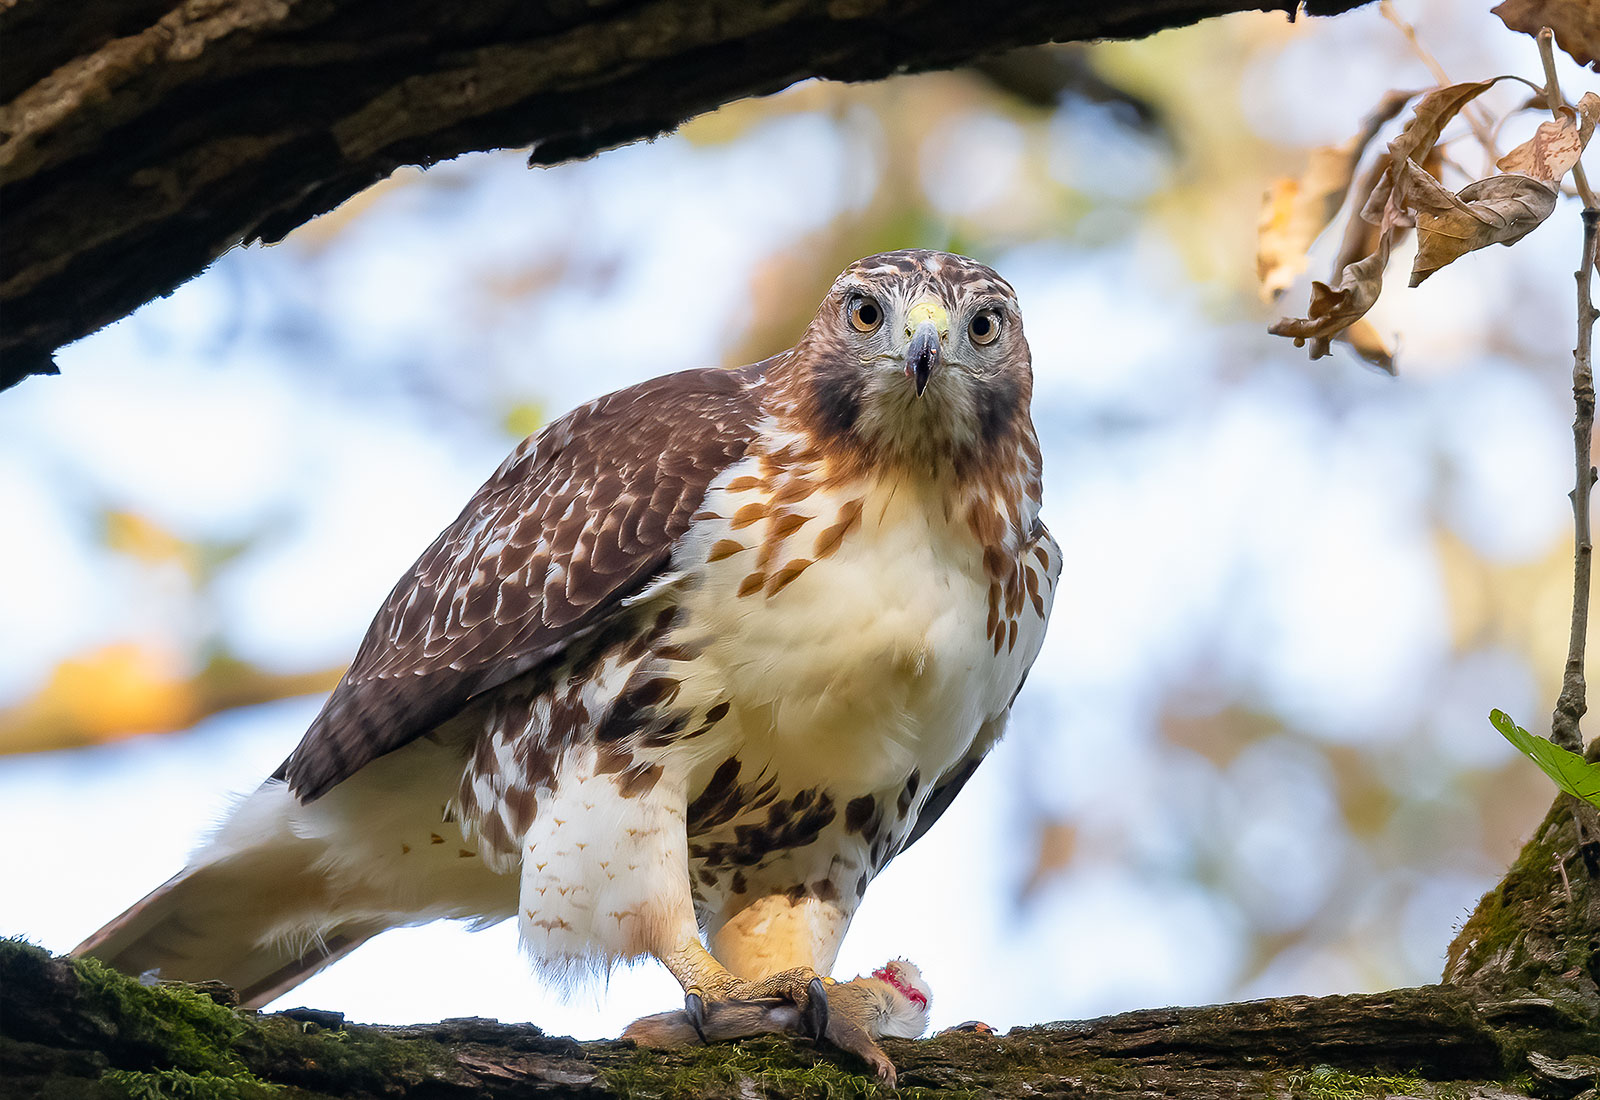 Red-tailed Hawk with its prey in a tree